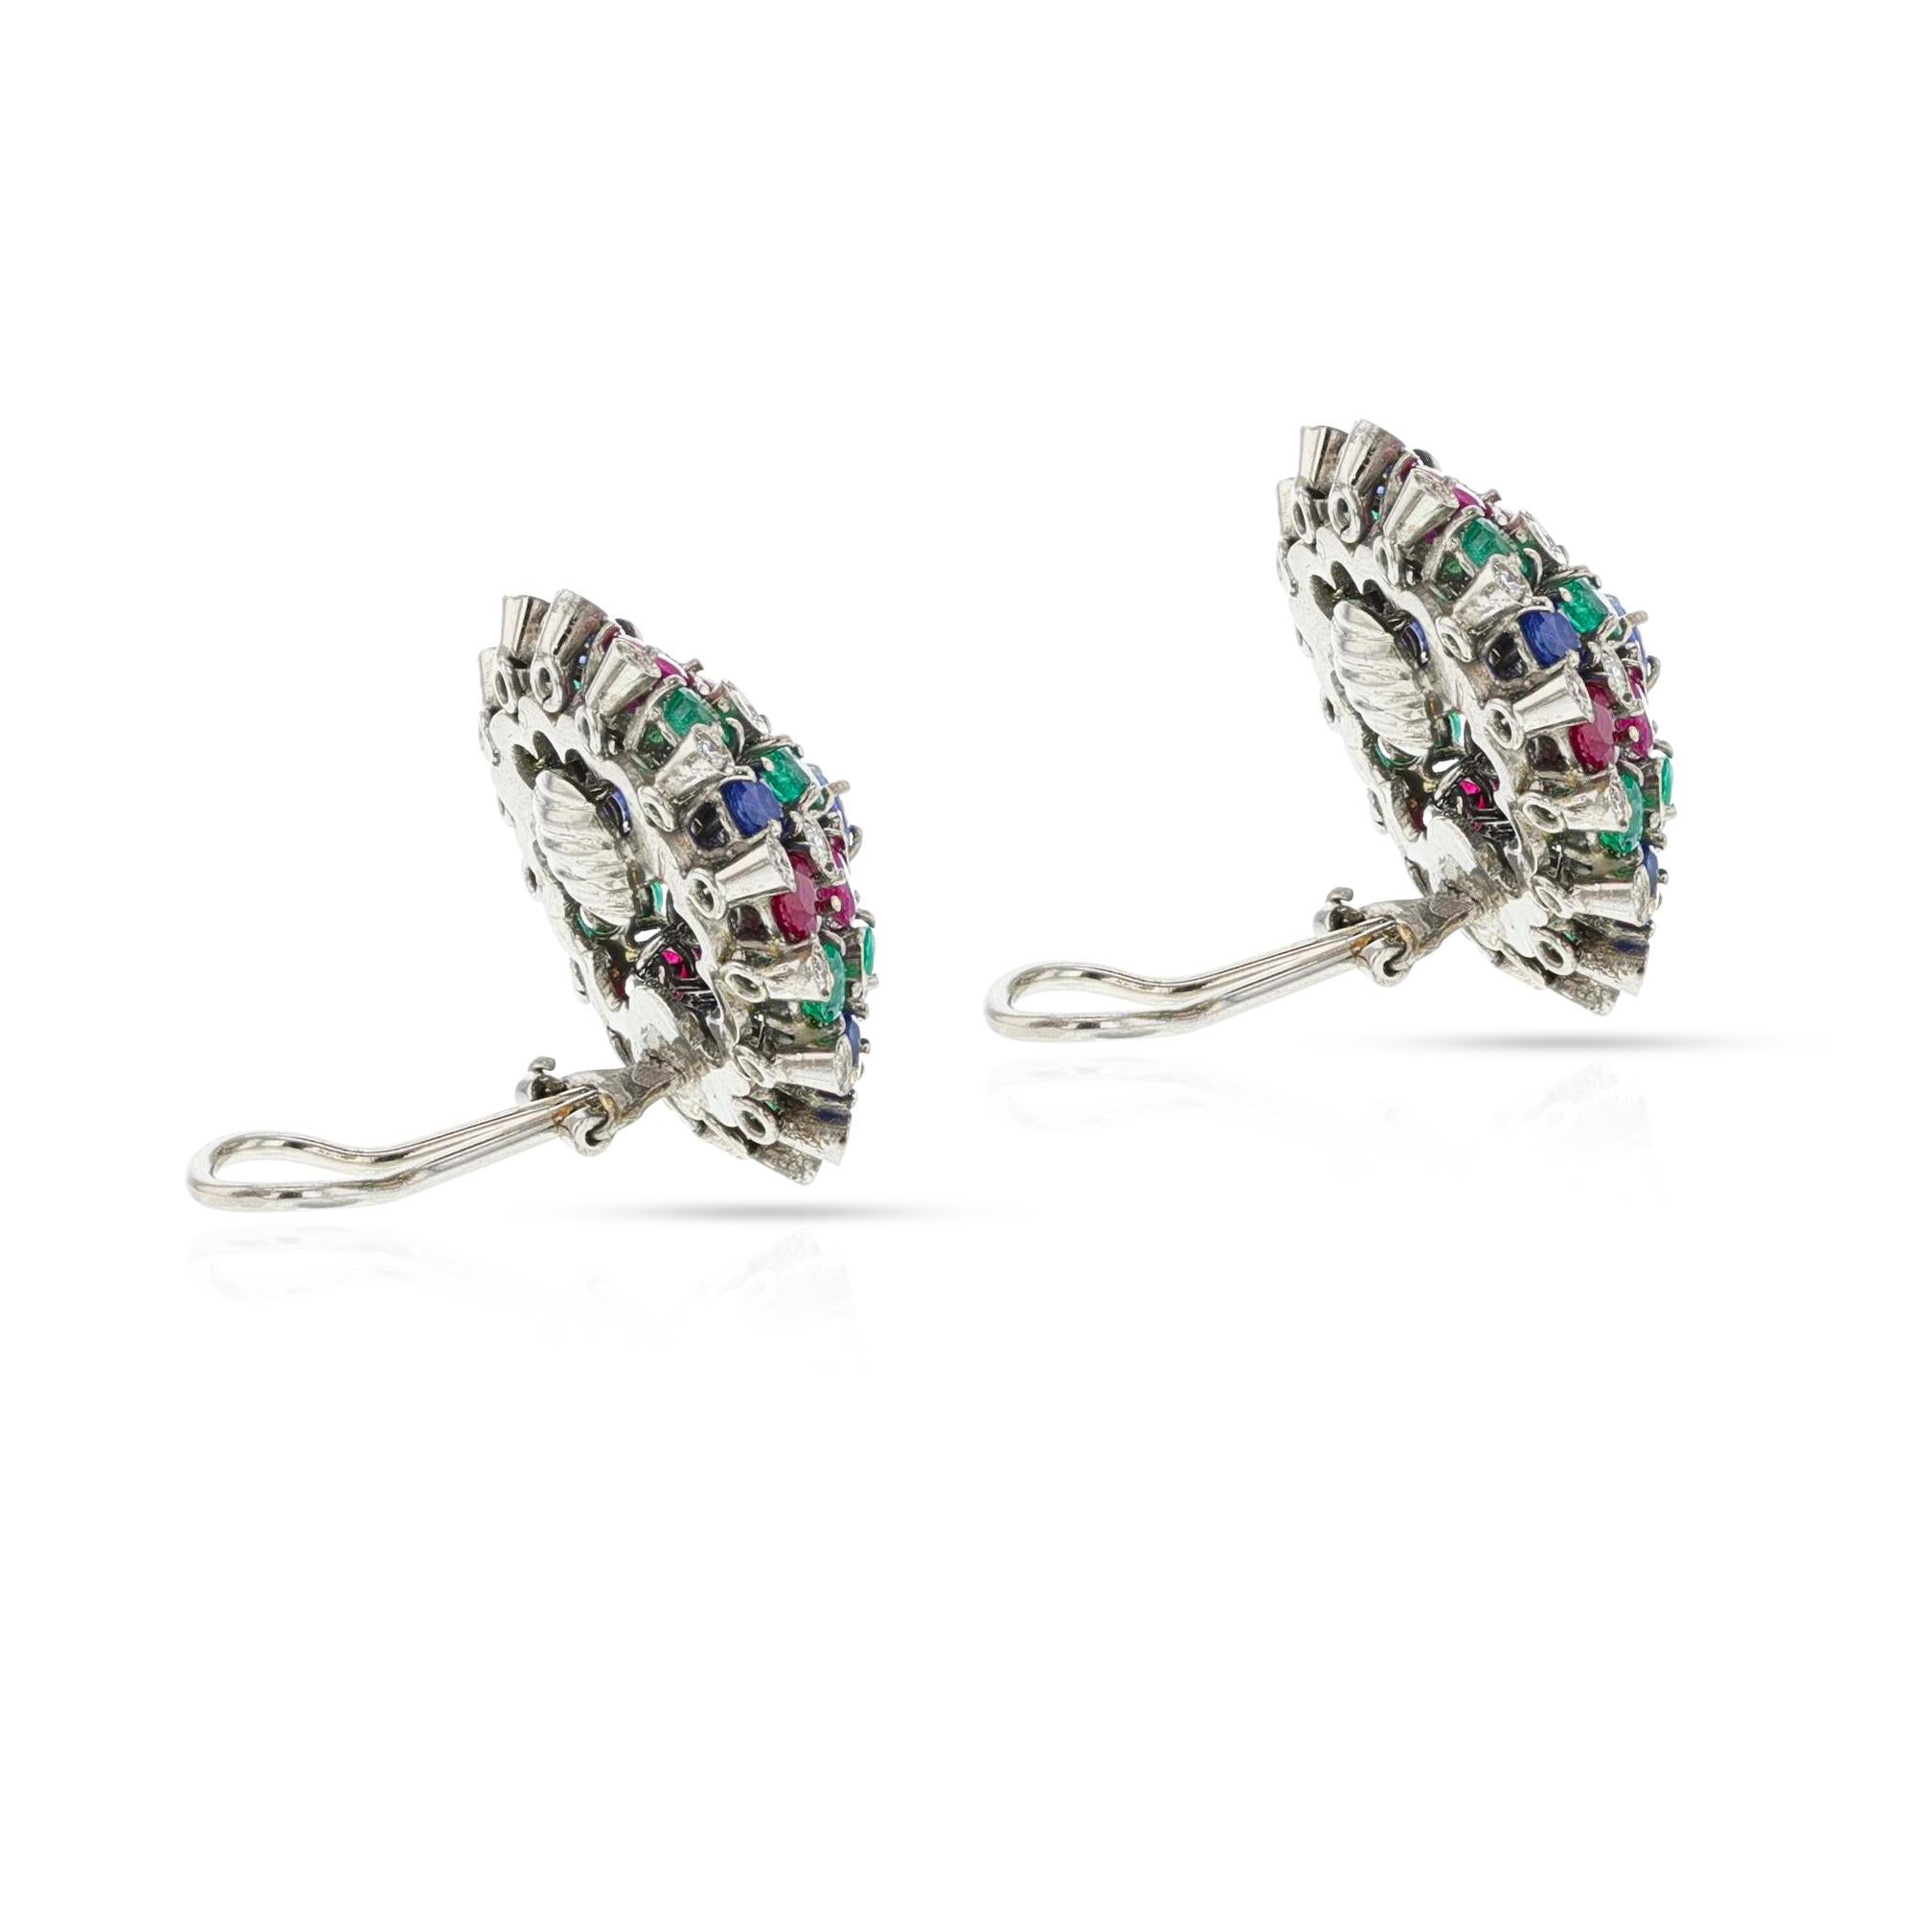 Round Ruby, Emerald, Sapphire and Diamond Dome Earrings, 18k In Excellent Condition For Sale In New York, NY